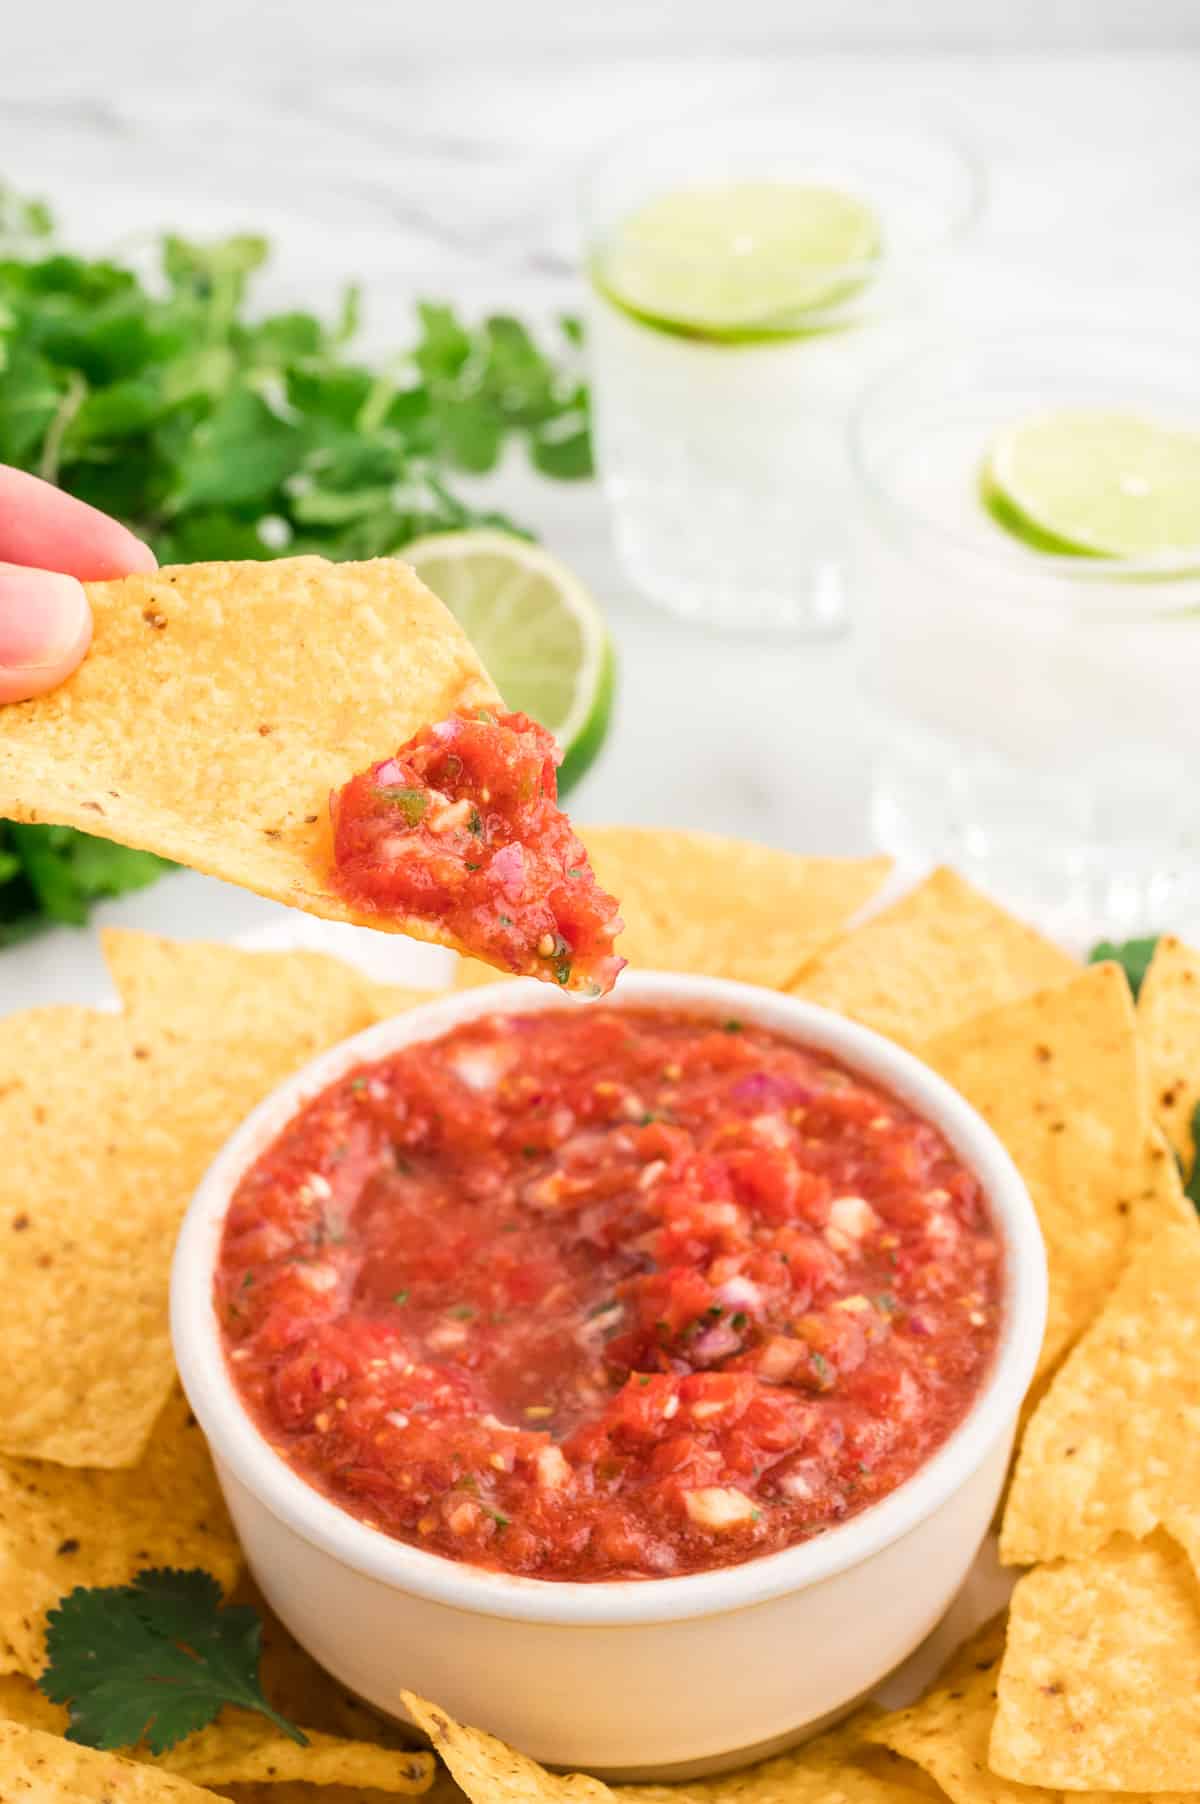 A bowl of salsa surrounded by tortilla chips. A hand is above the salsa holding a chip with a scoop of salsa on it.